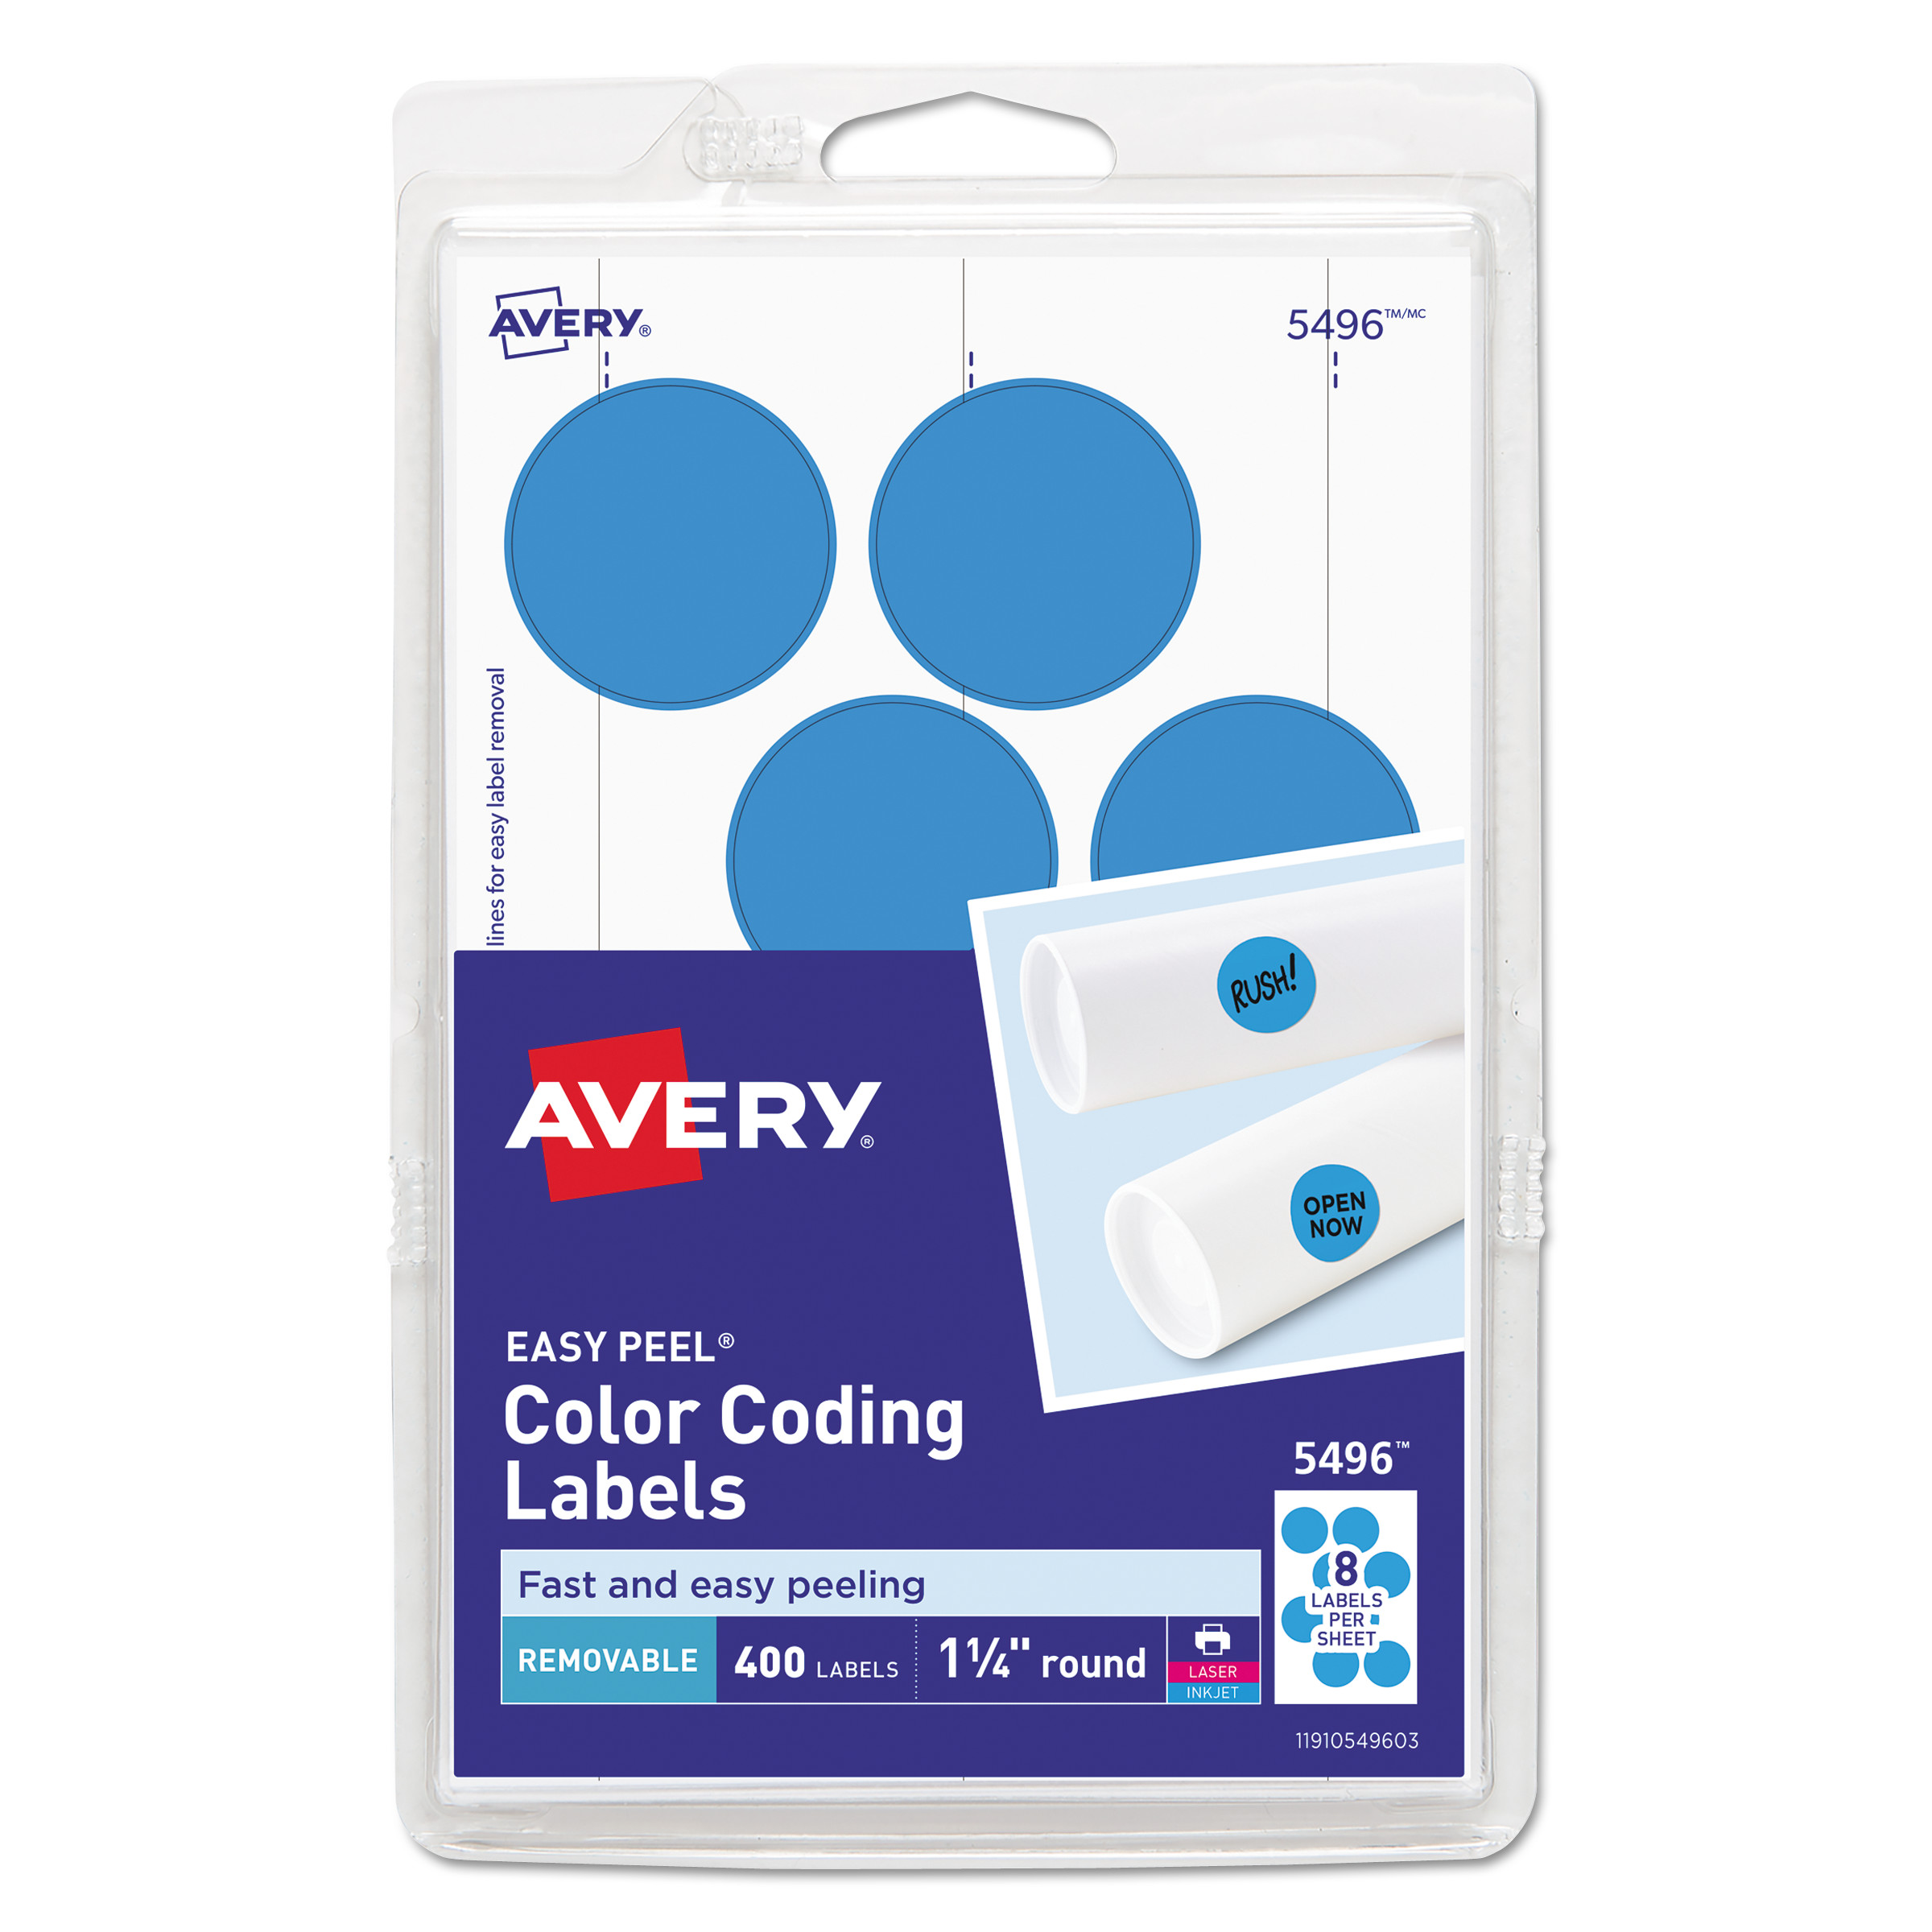  Avery 05496 Printable Self-Adhesive Removable Color-Coding Labels, 1.25 dia., Light Blue, 8/Sheet, 50 Sheets/Pack (AVE05496) 